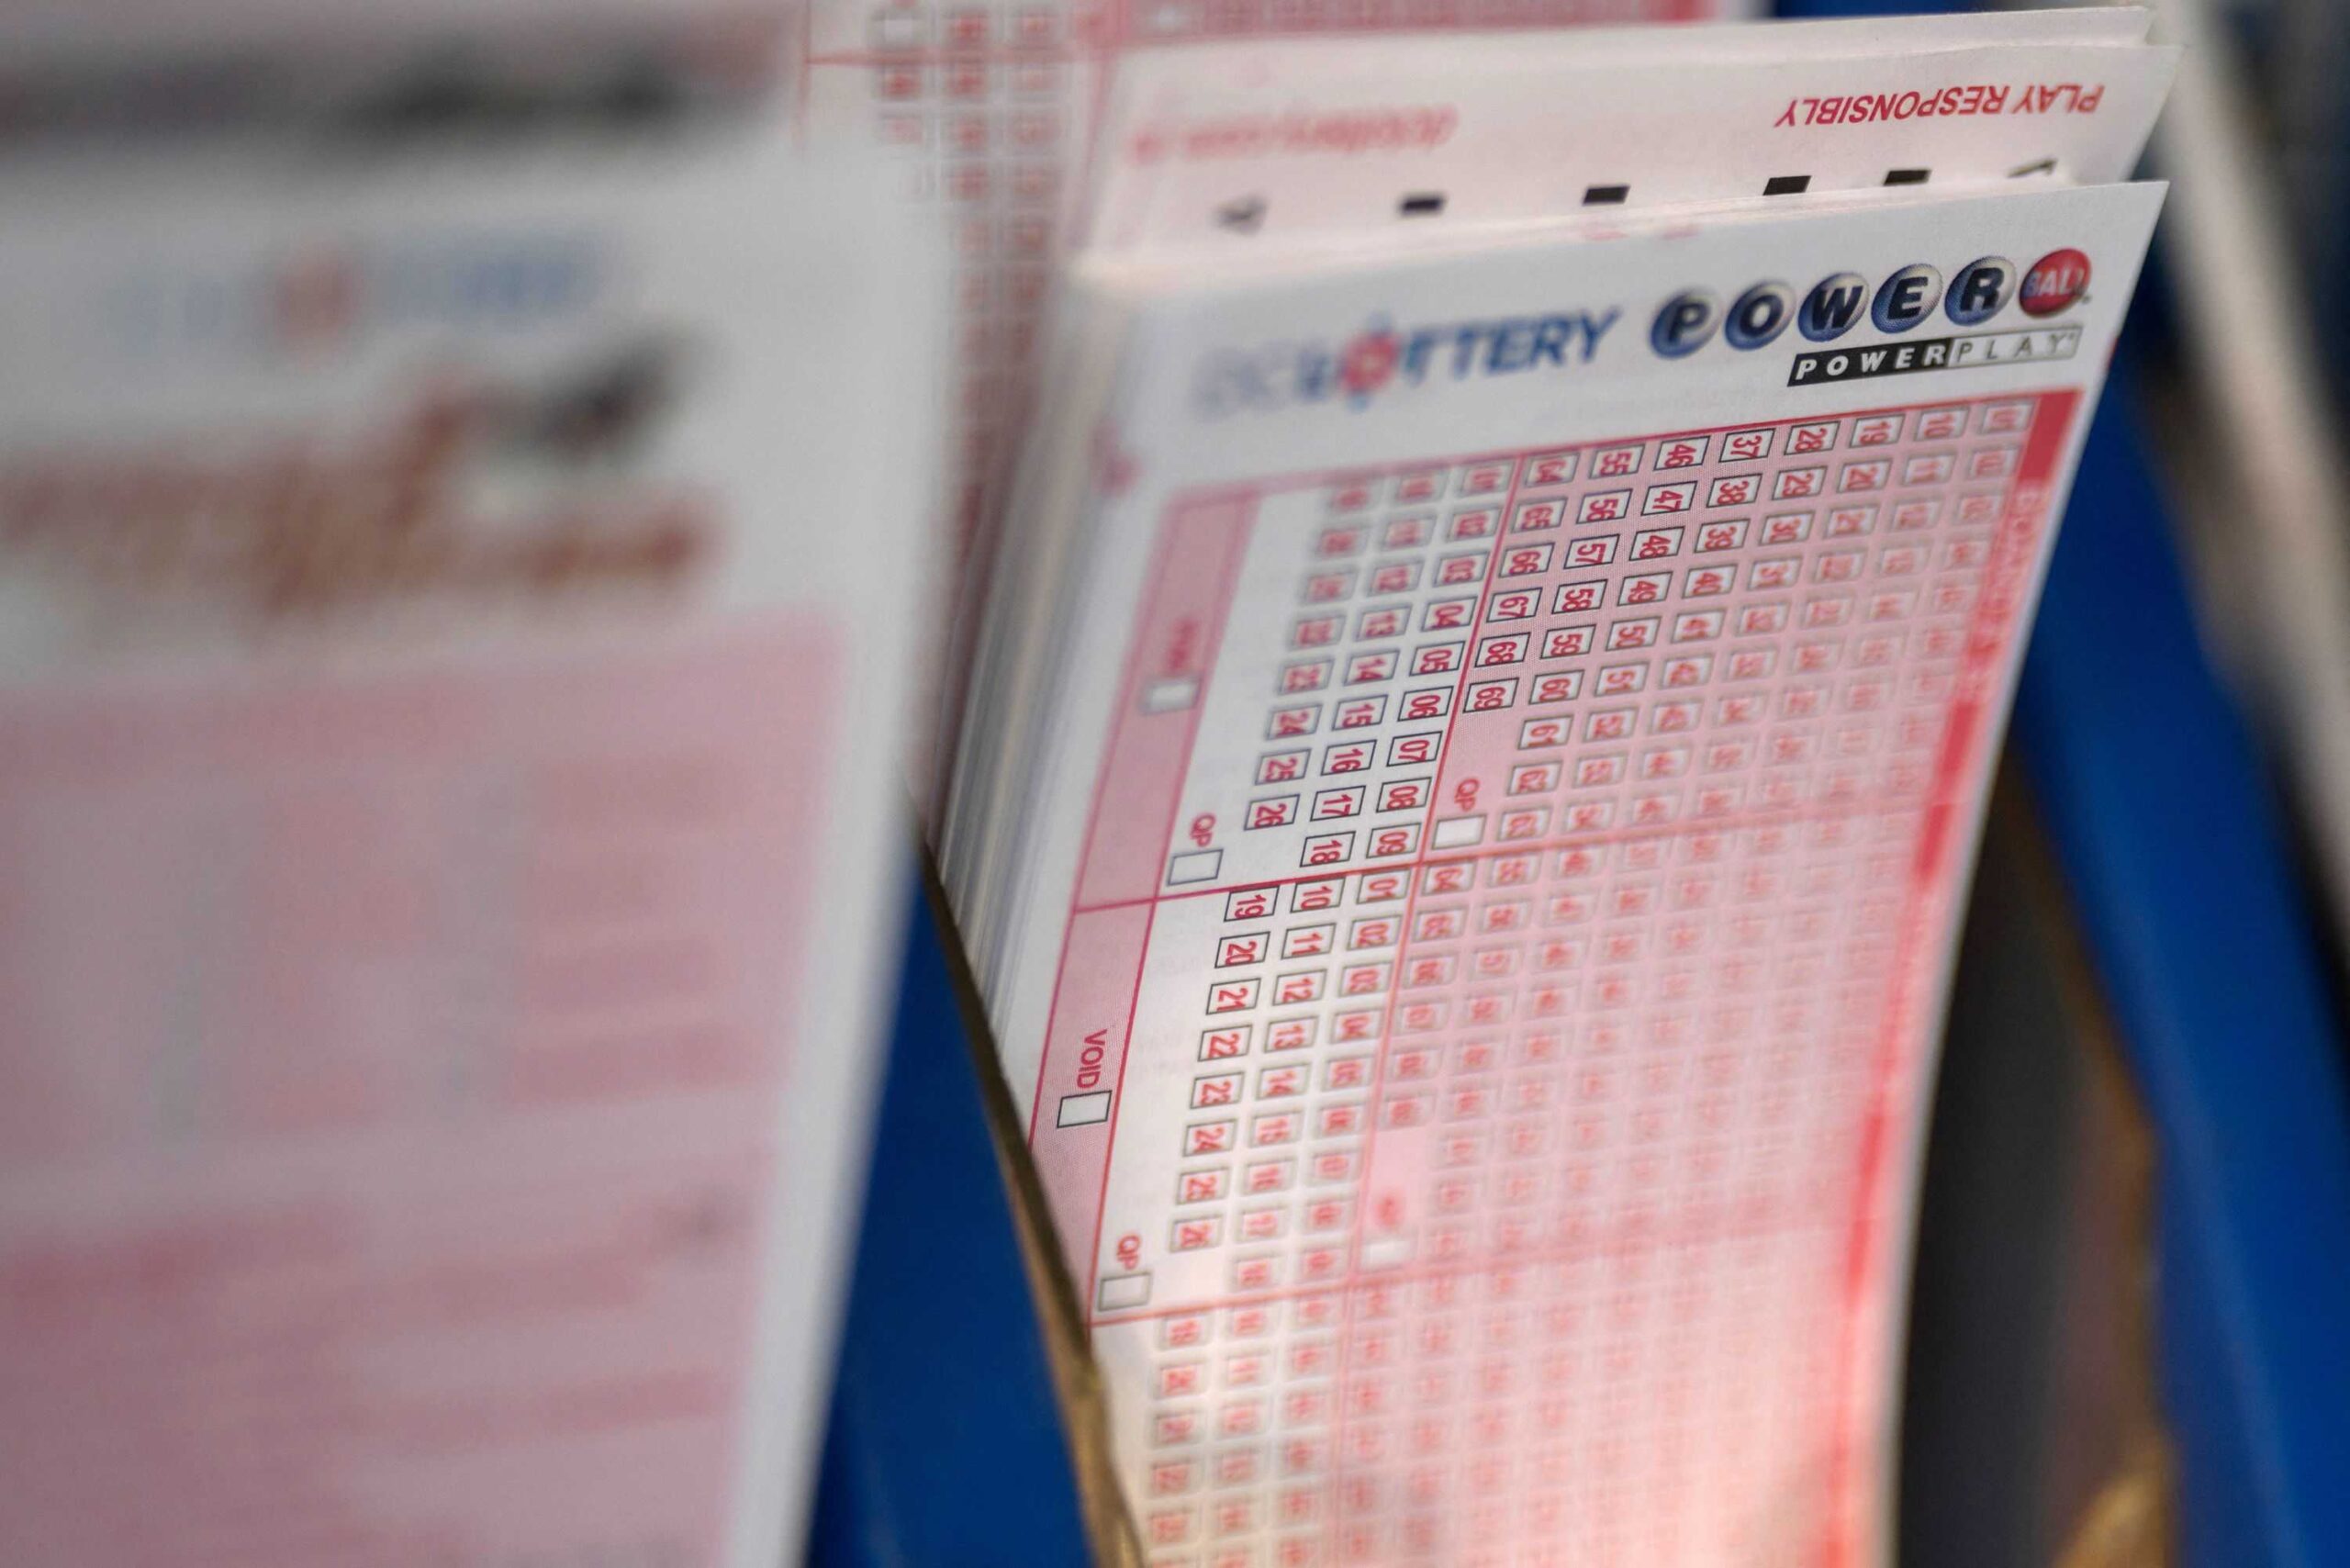 [WBALTV] Powerball jackpot climbs to 559M after no winners for Monday